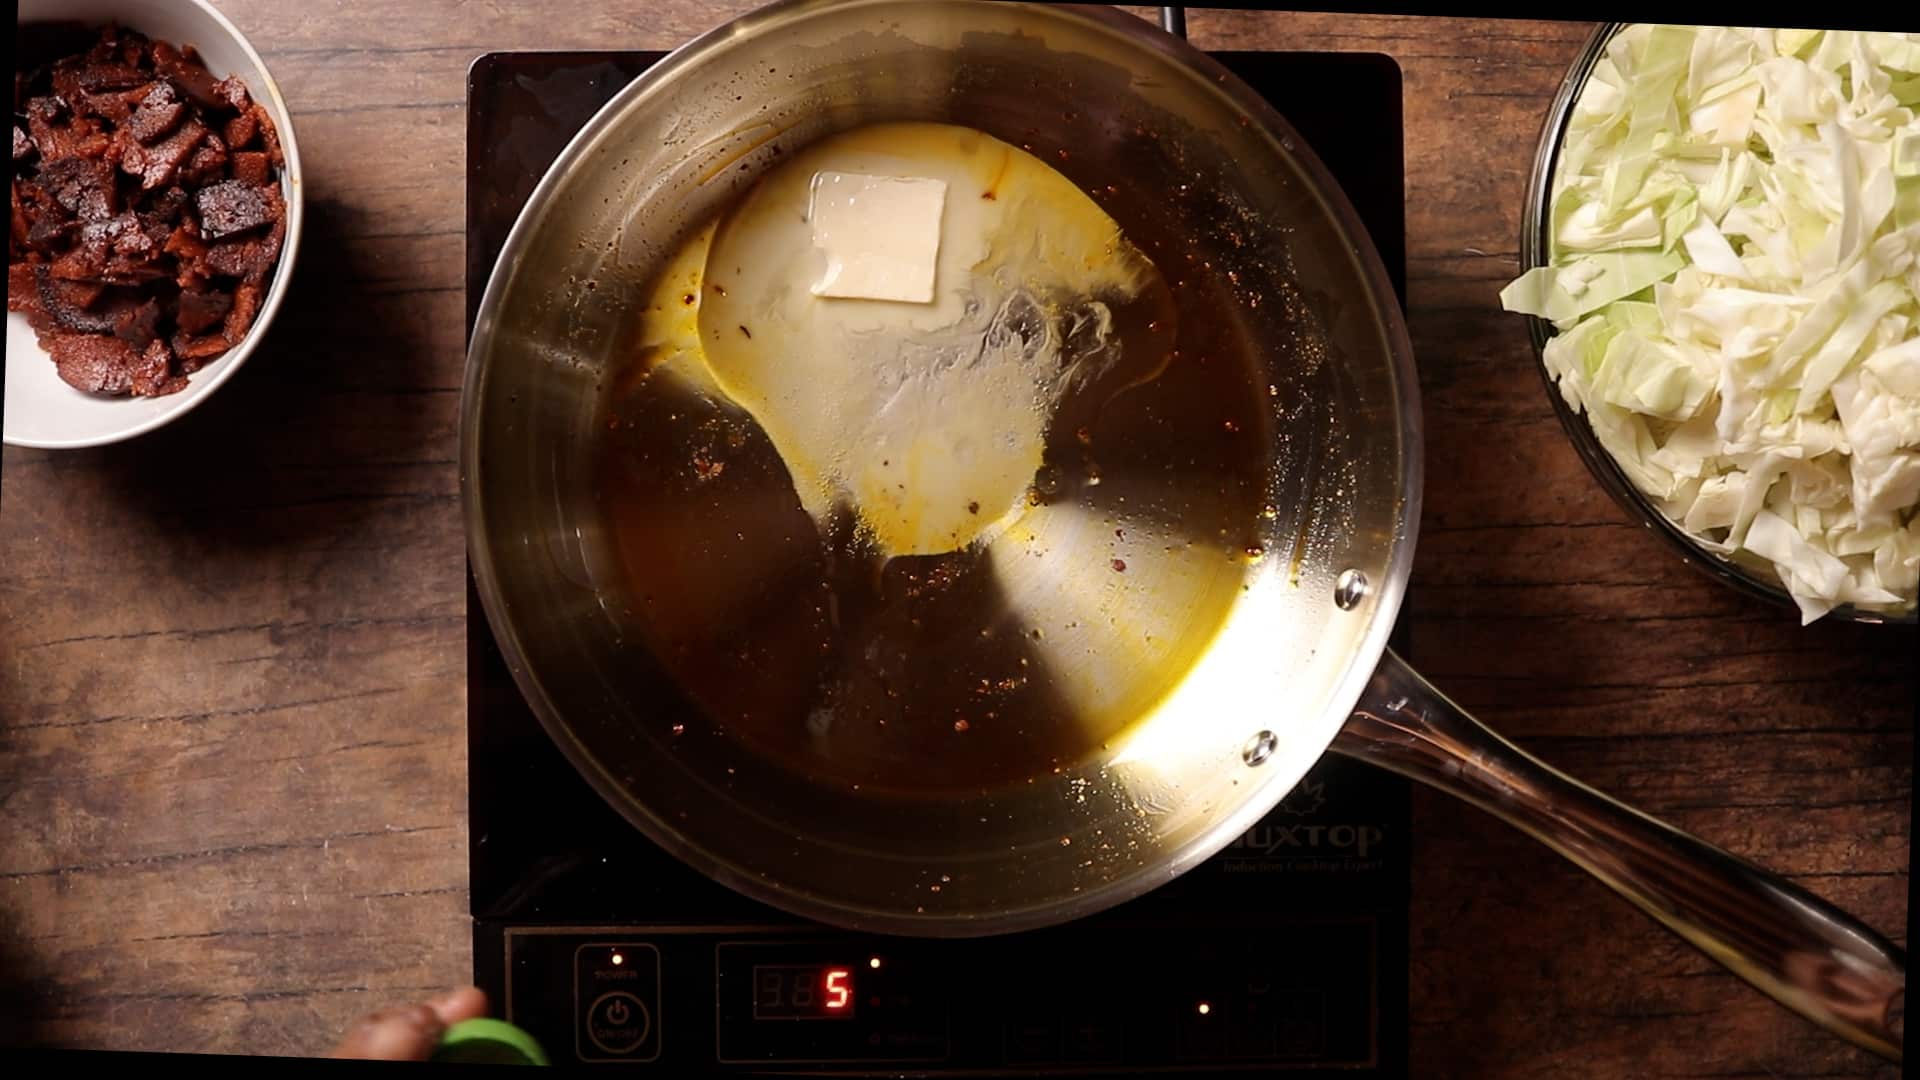 photo of step 5 where vegan butter is added to a pan